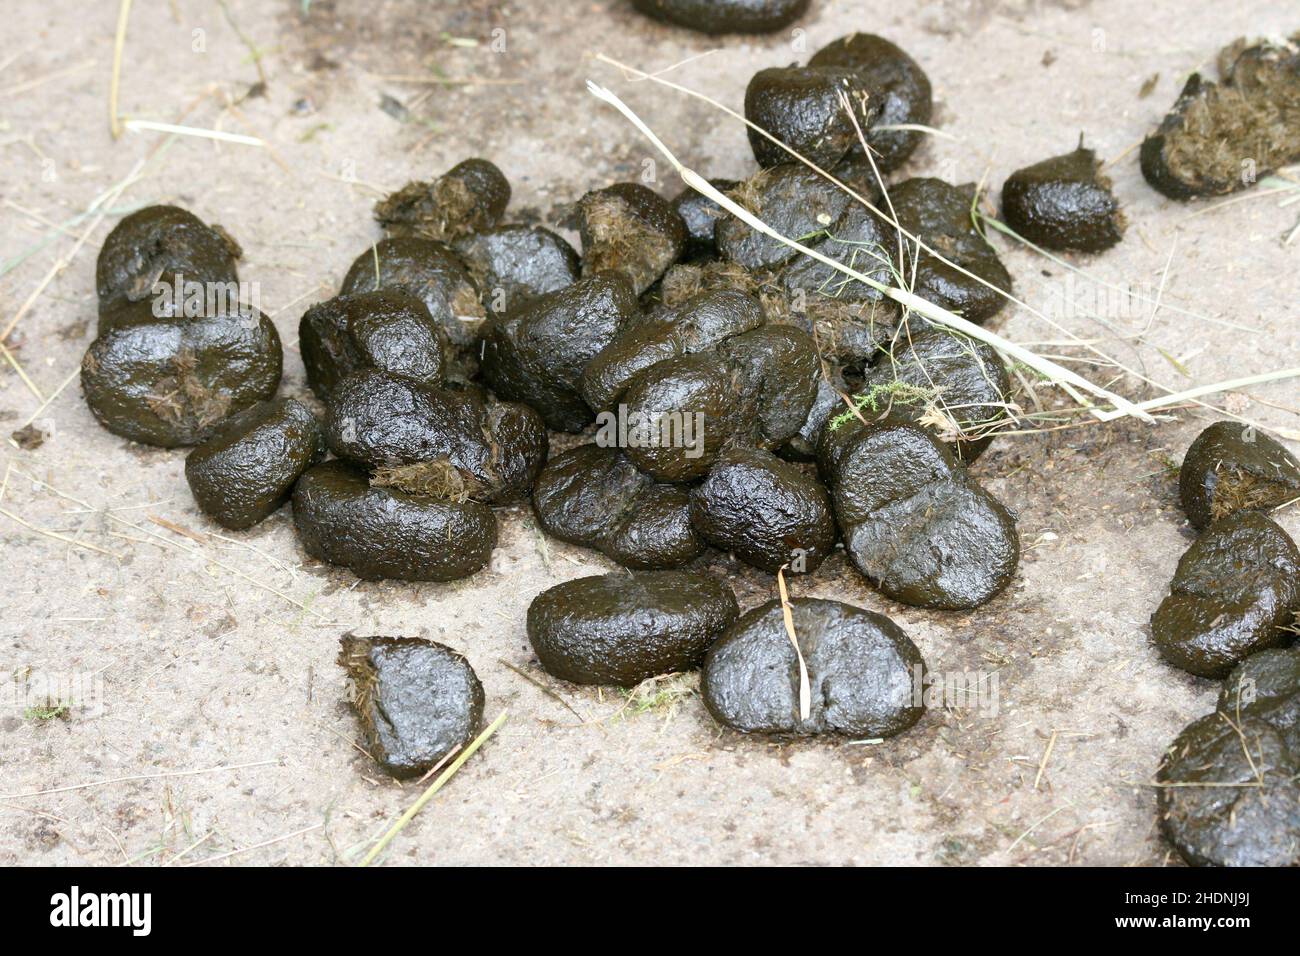 dung, horse apples, dungs, horse apple, horse excrement Stock Photo